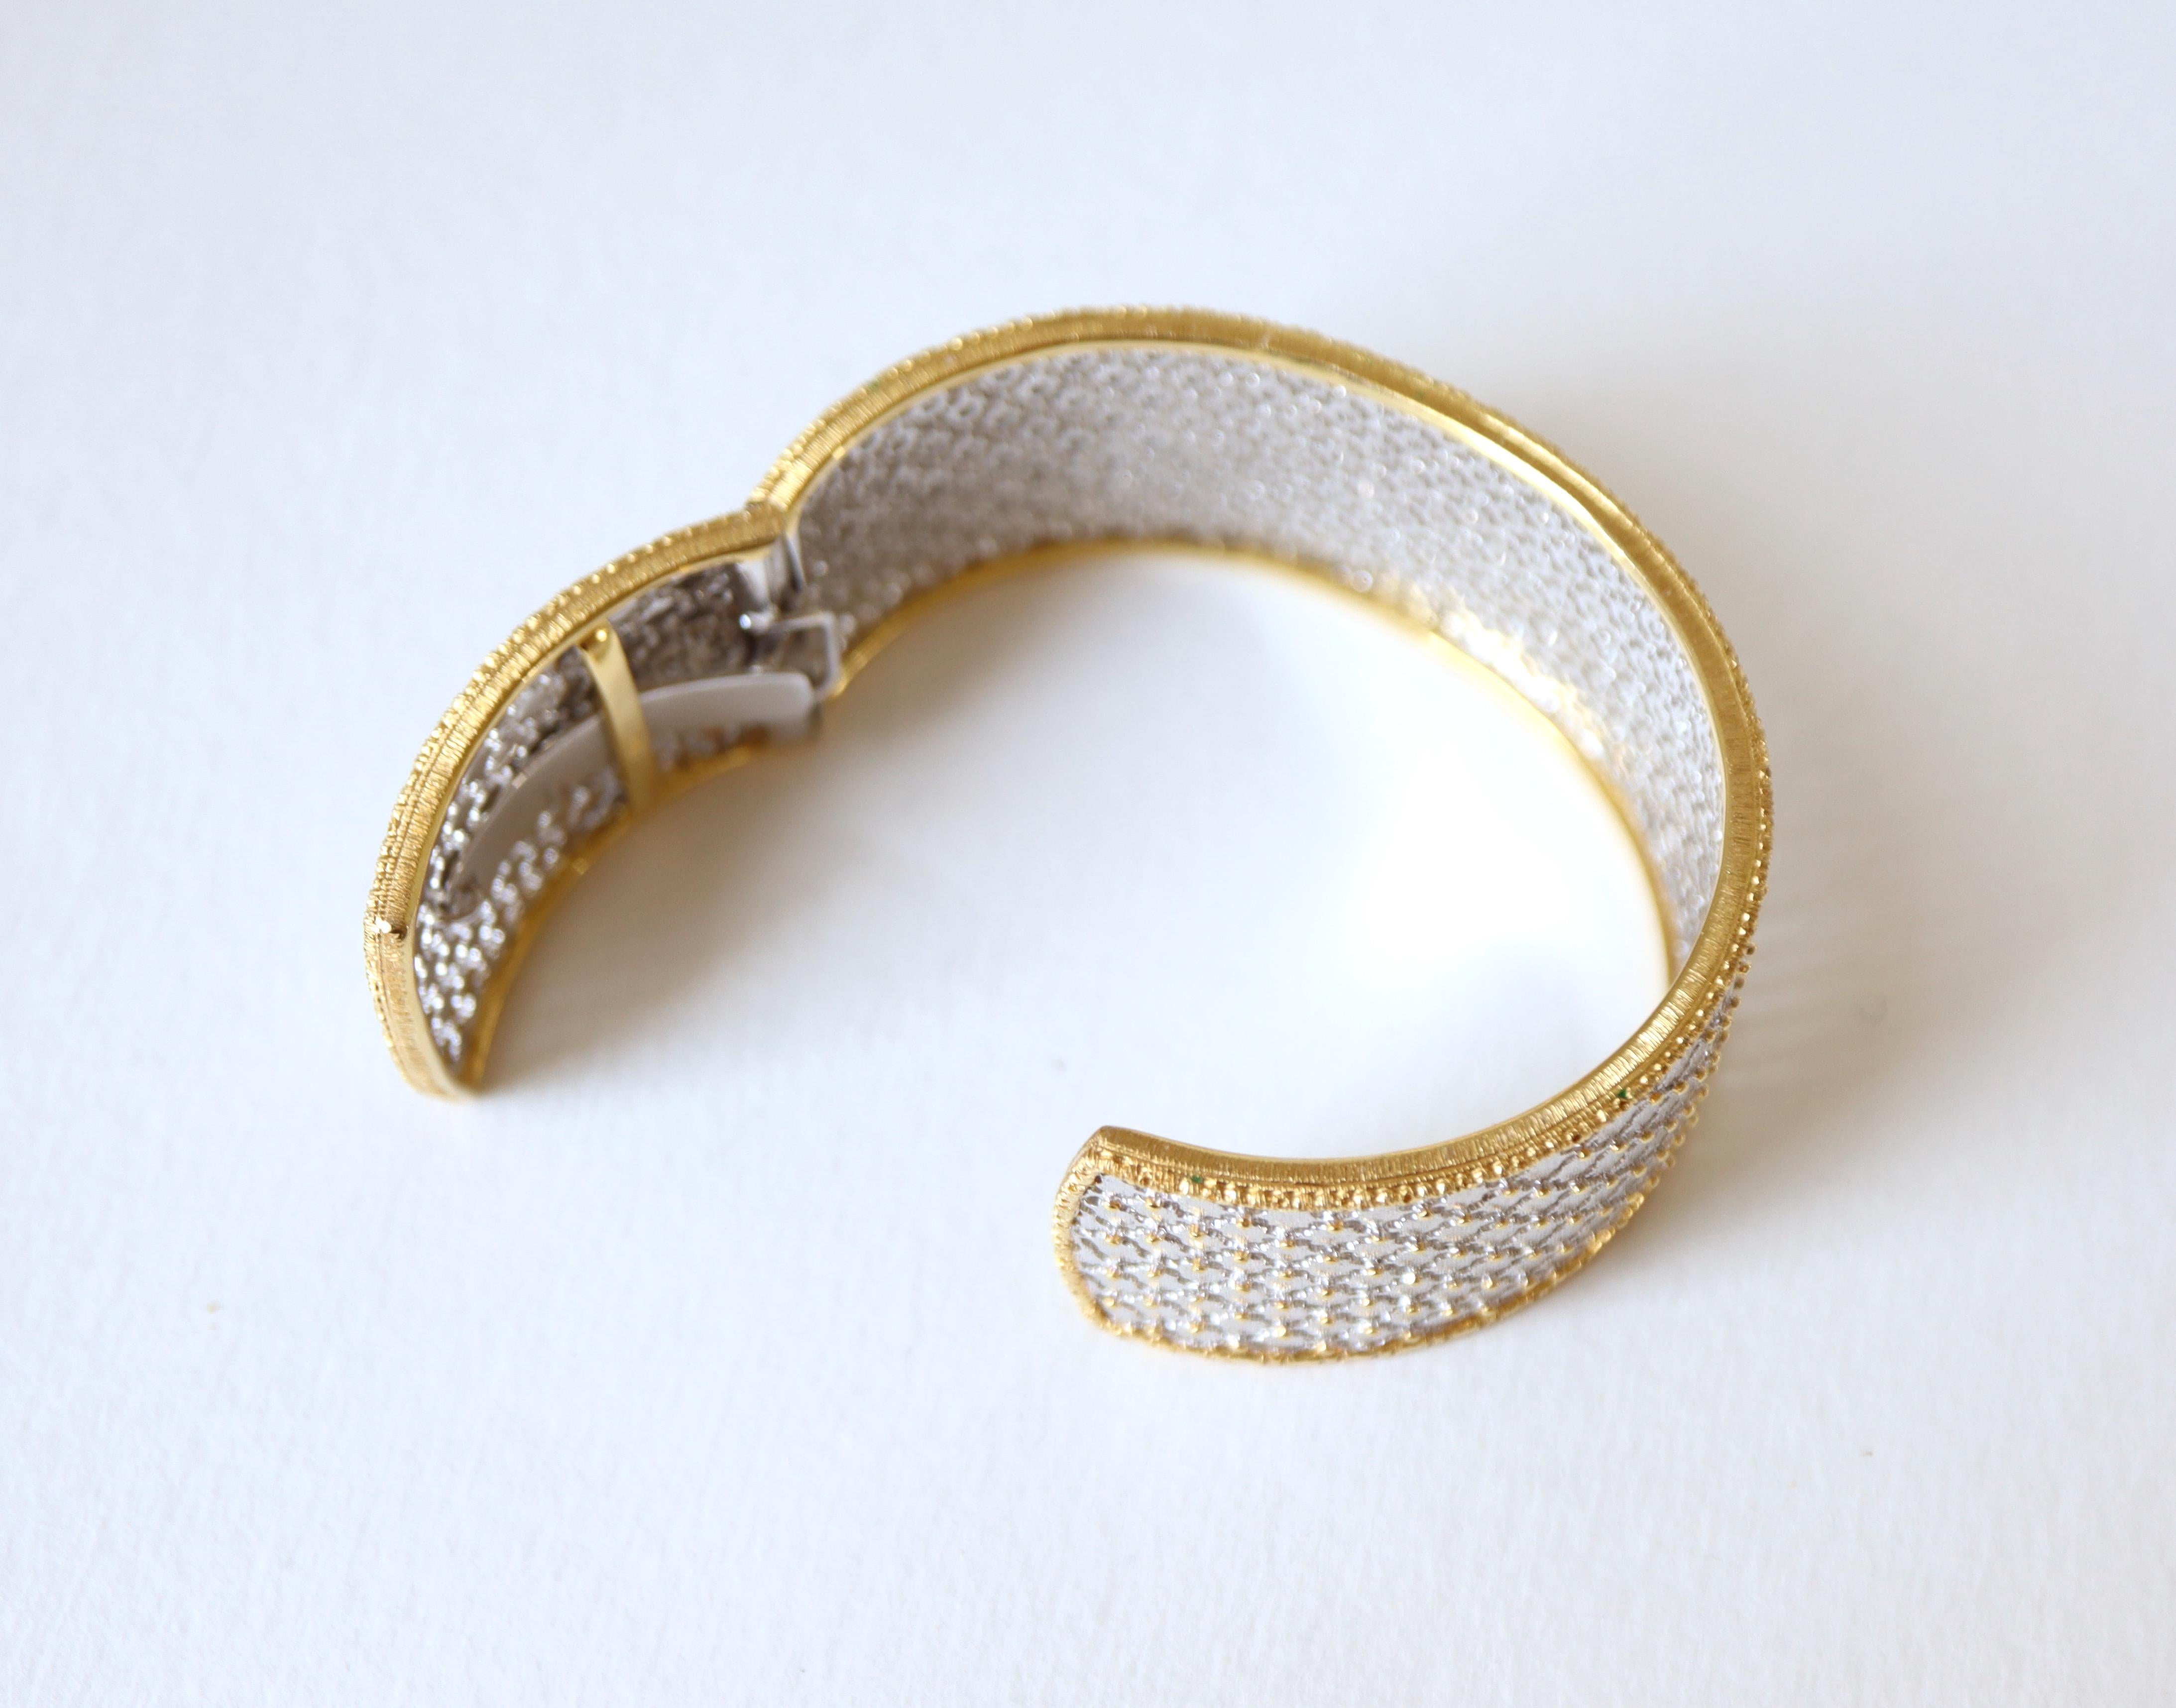 Bracelet Bangle Yellow Withe Gold 18k 3.51 Carats of Diamonds For Sale 1